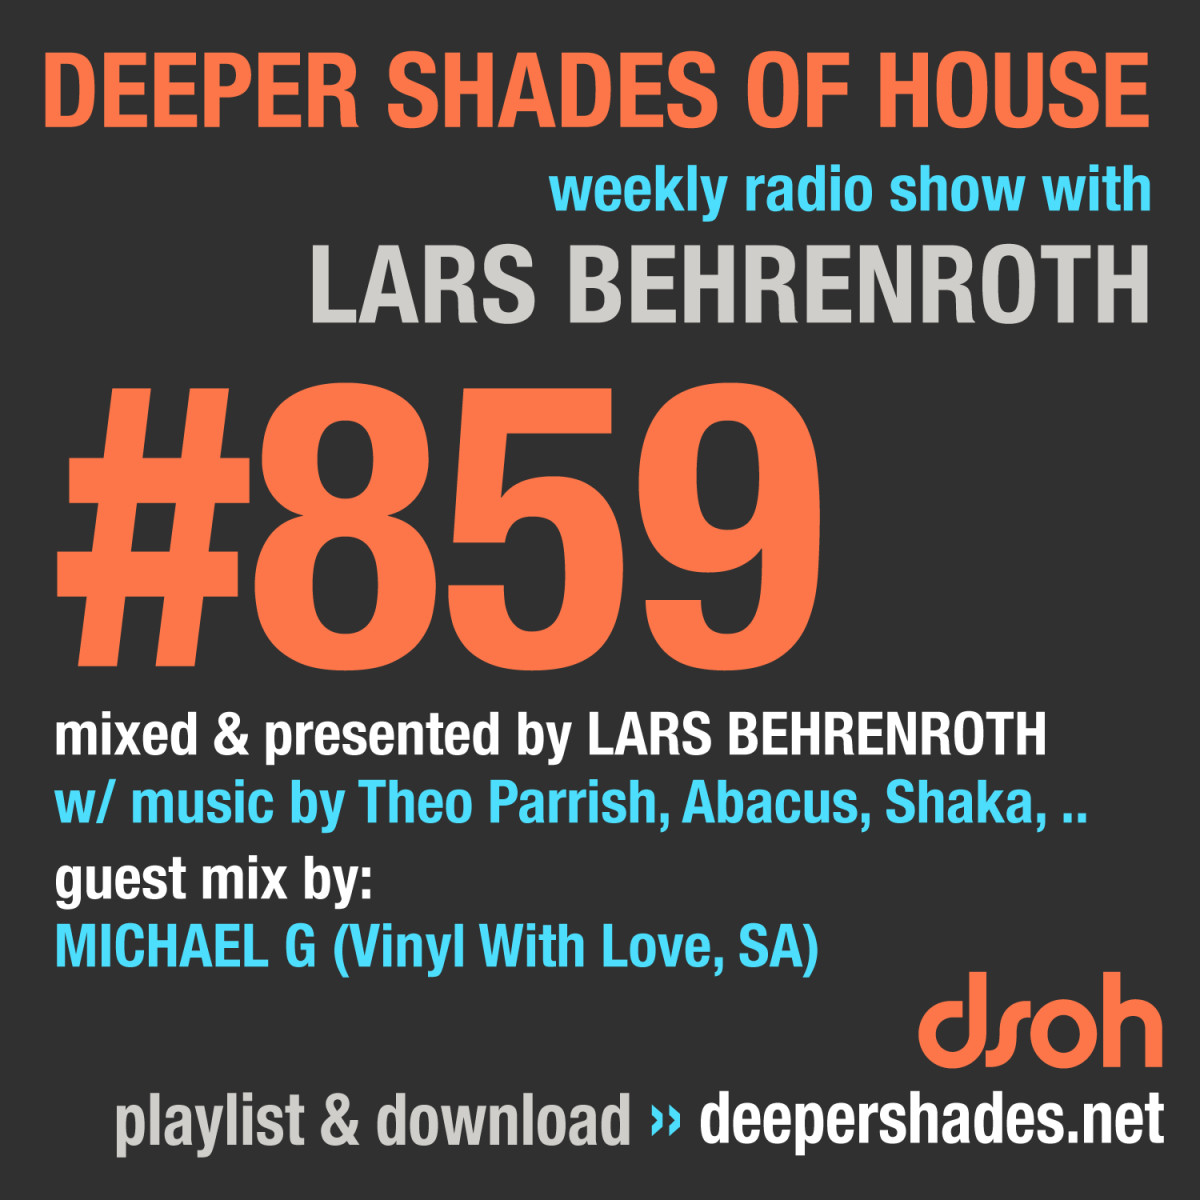 #nowplaying on radio.deepershades.net : Lars Behrenroth w/ exclusive guest mix by MICHAEL G (Vinyl With Love, South Africa) - DSOH 859 Deeper Shades Of House #deephouse #livestream #dsoh #housemusic